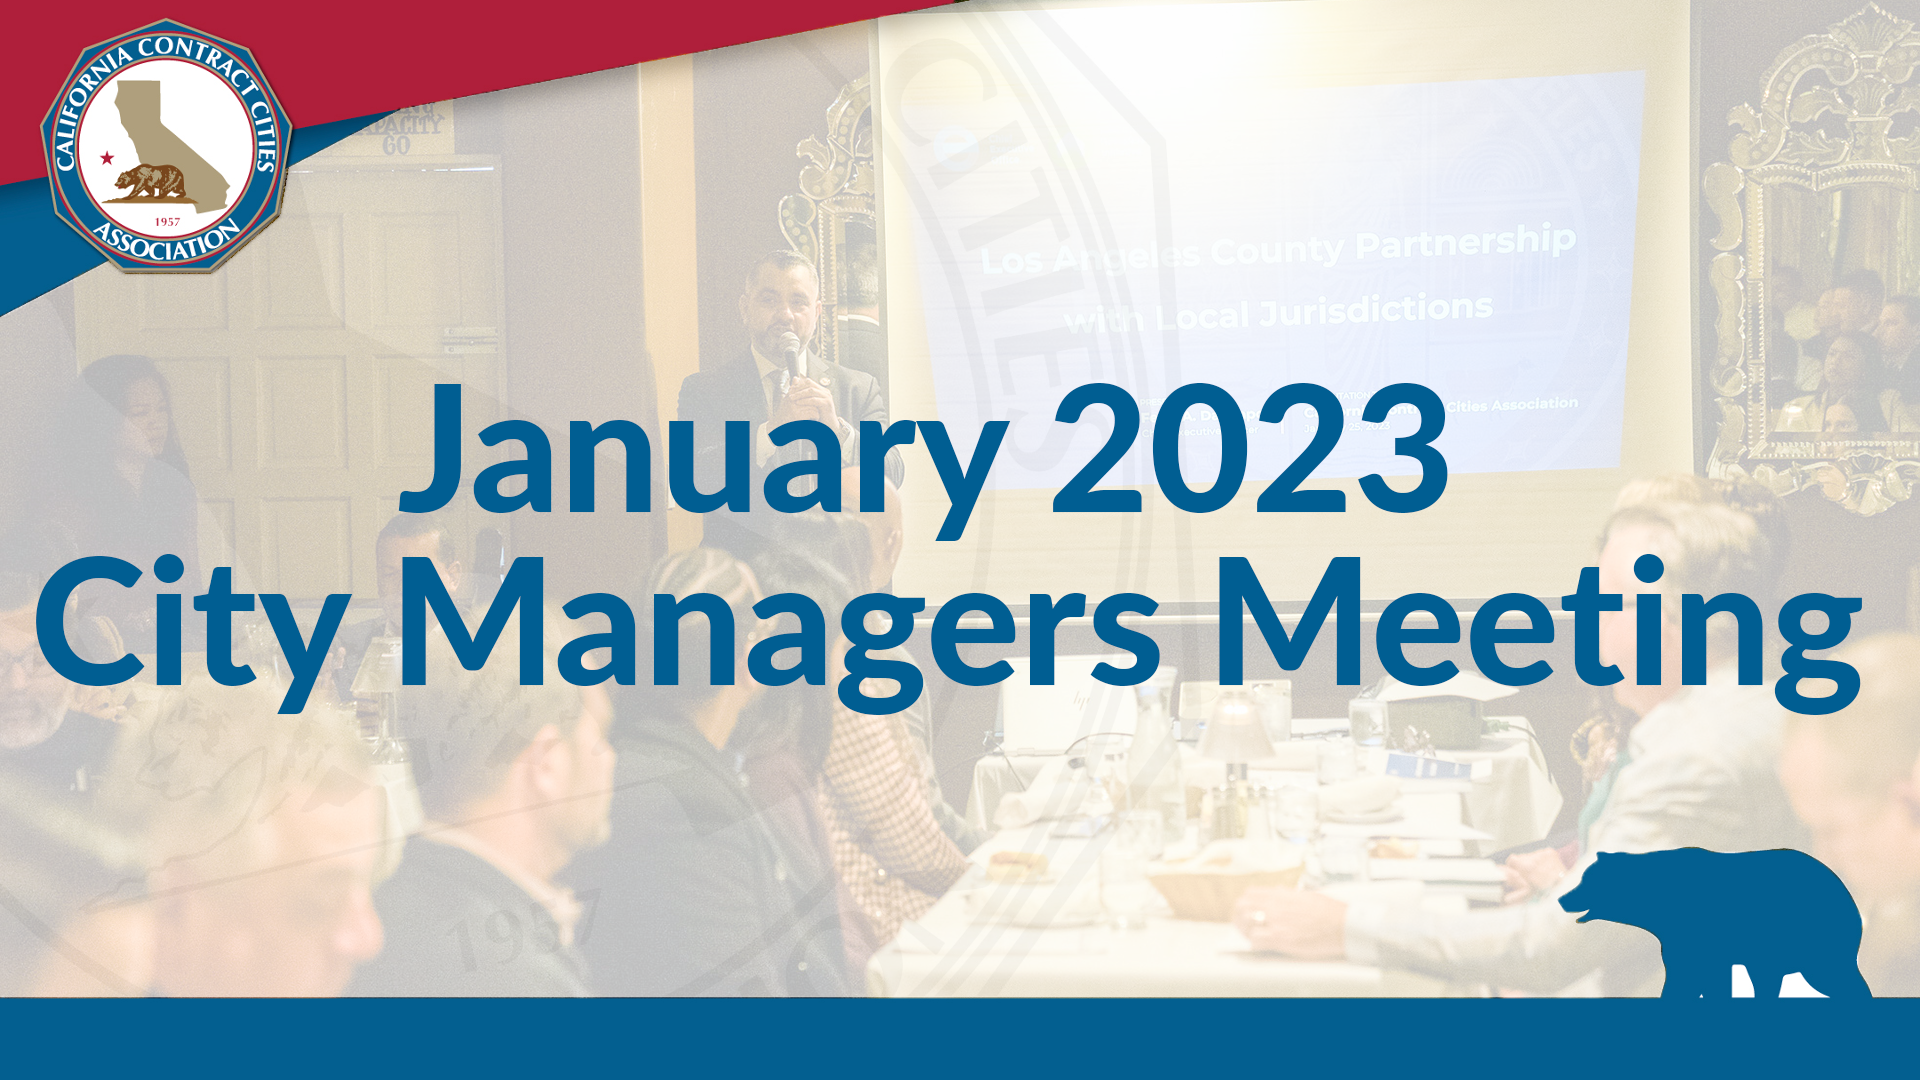 January 2023 City Managers Meeting